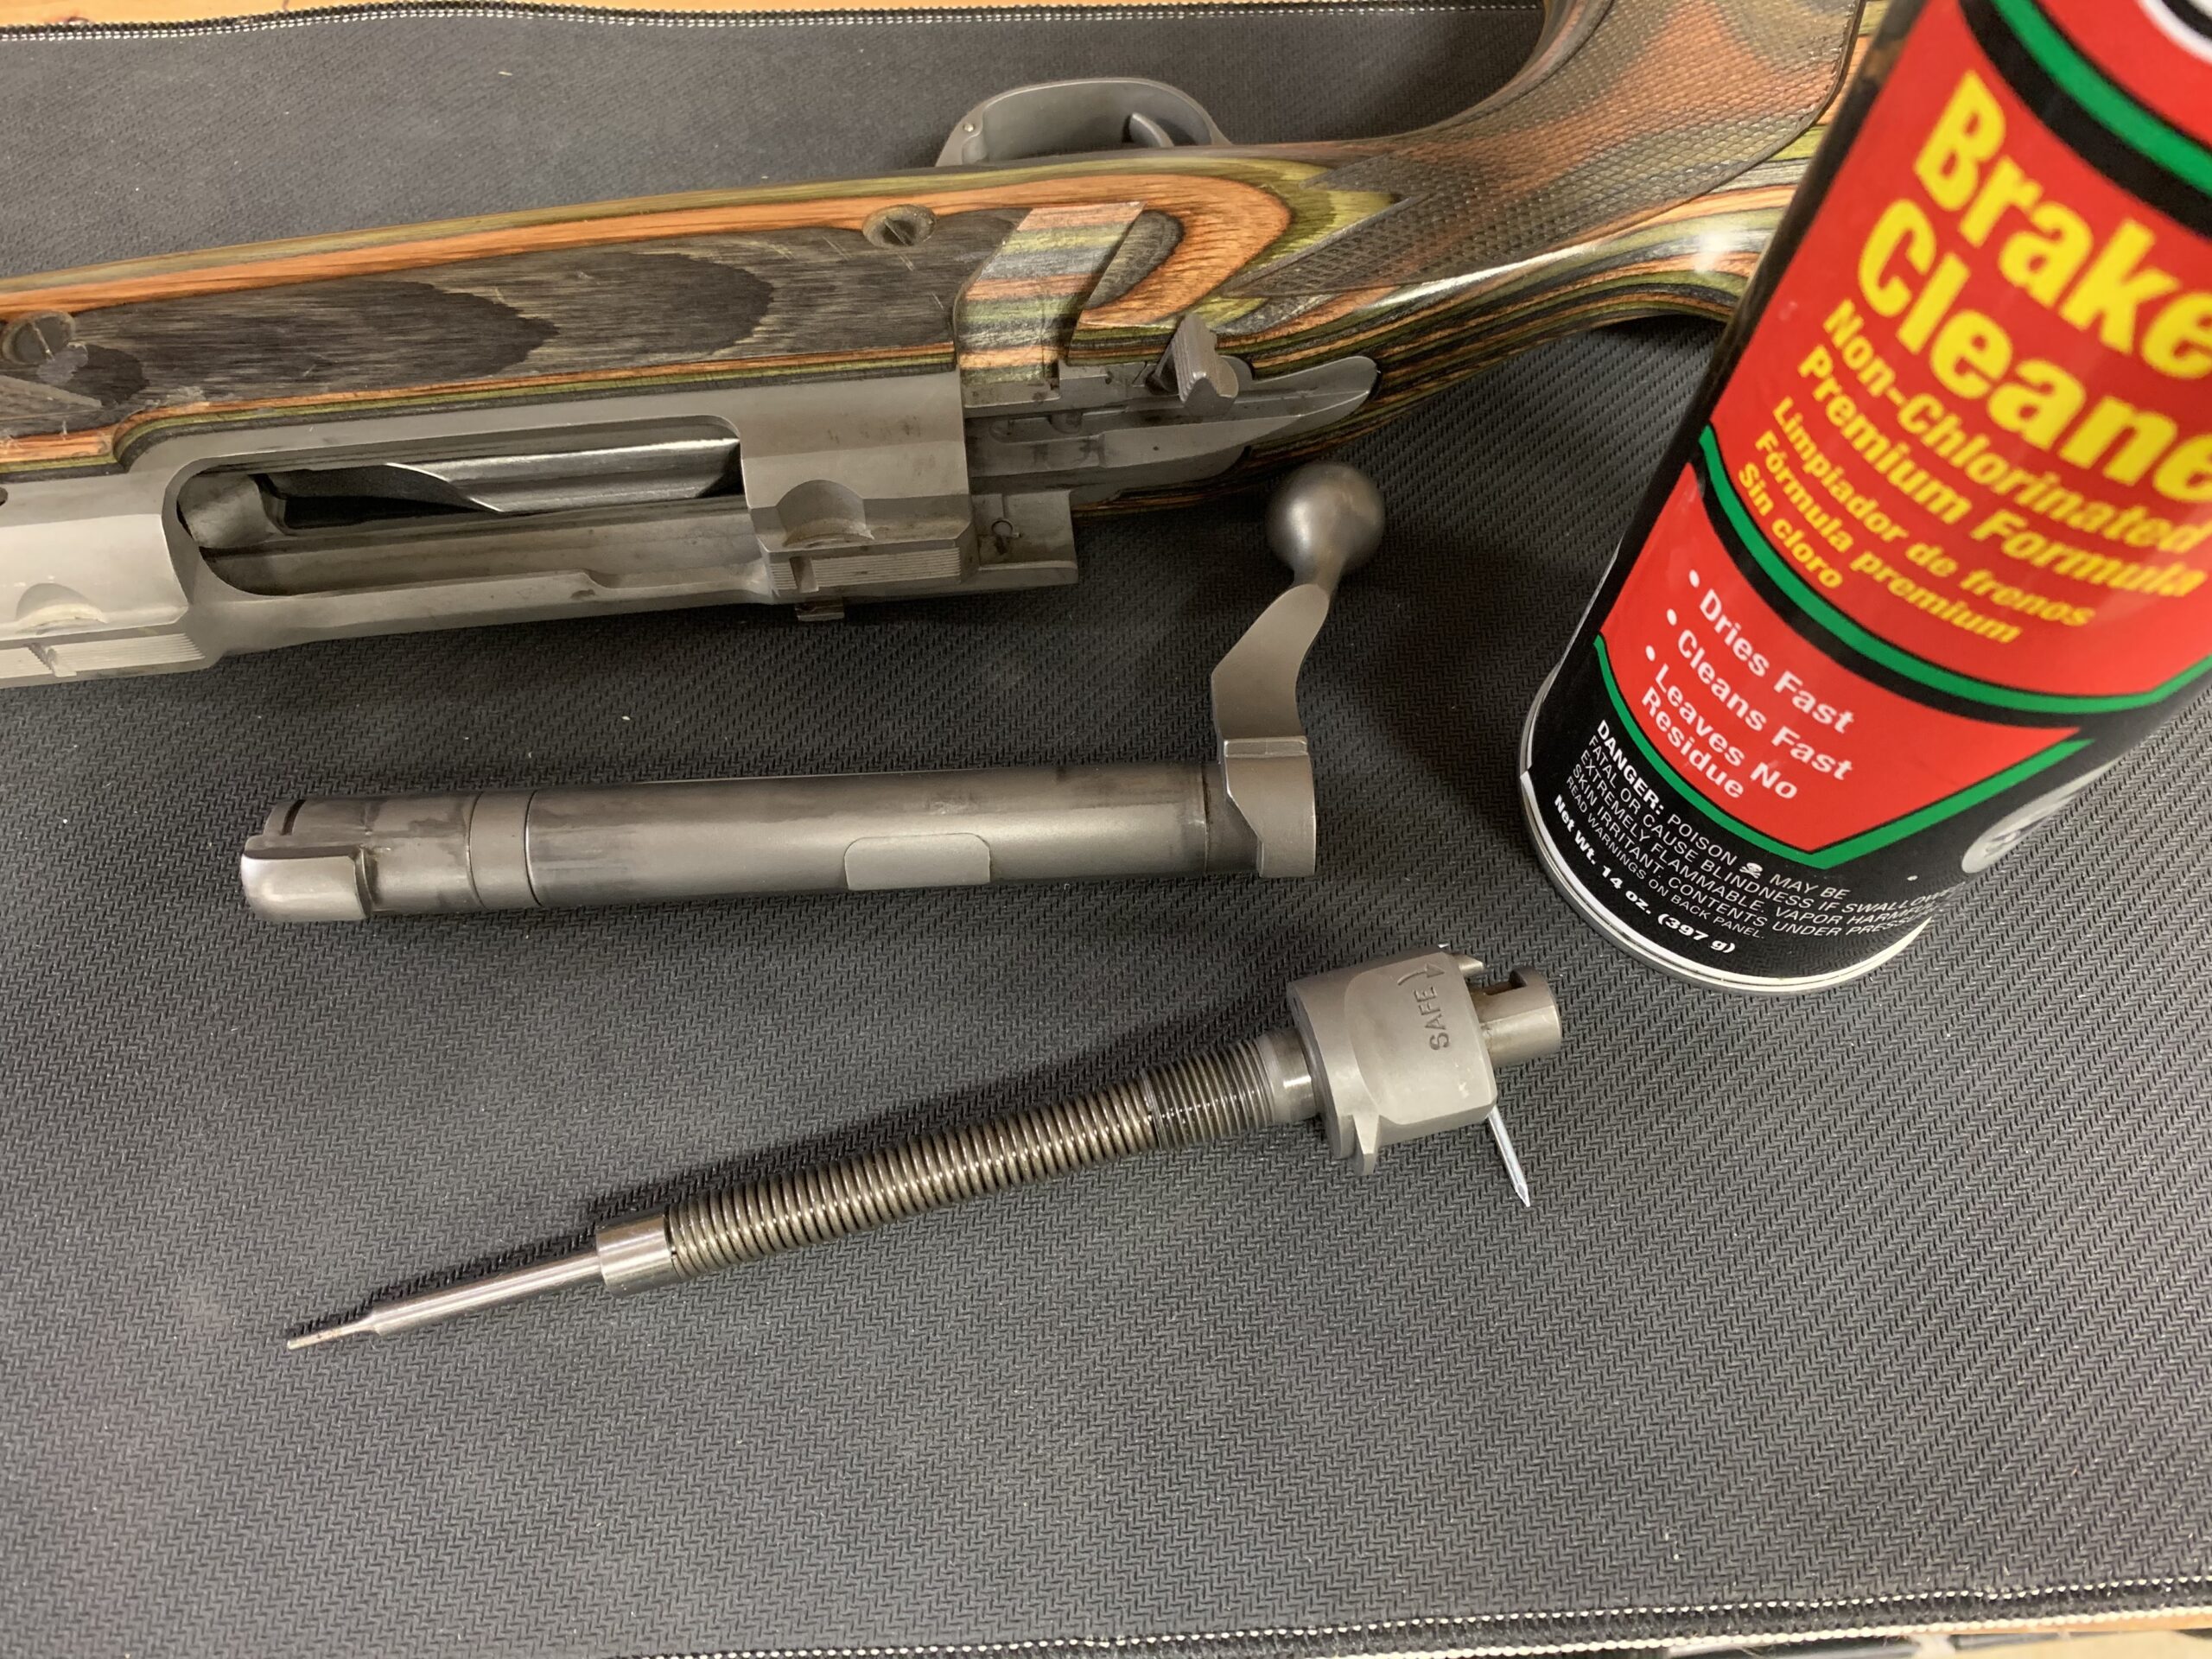 Wipe down your bolt and spray it with brake cleaner to ensure it runs properly in the cold.